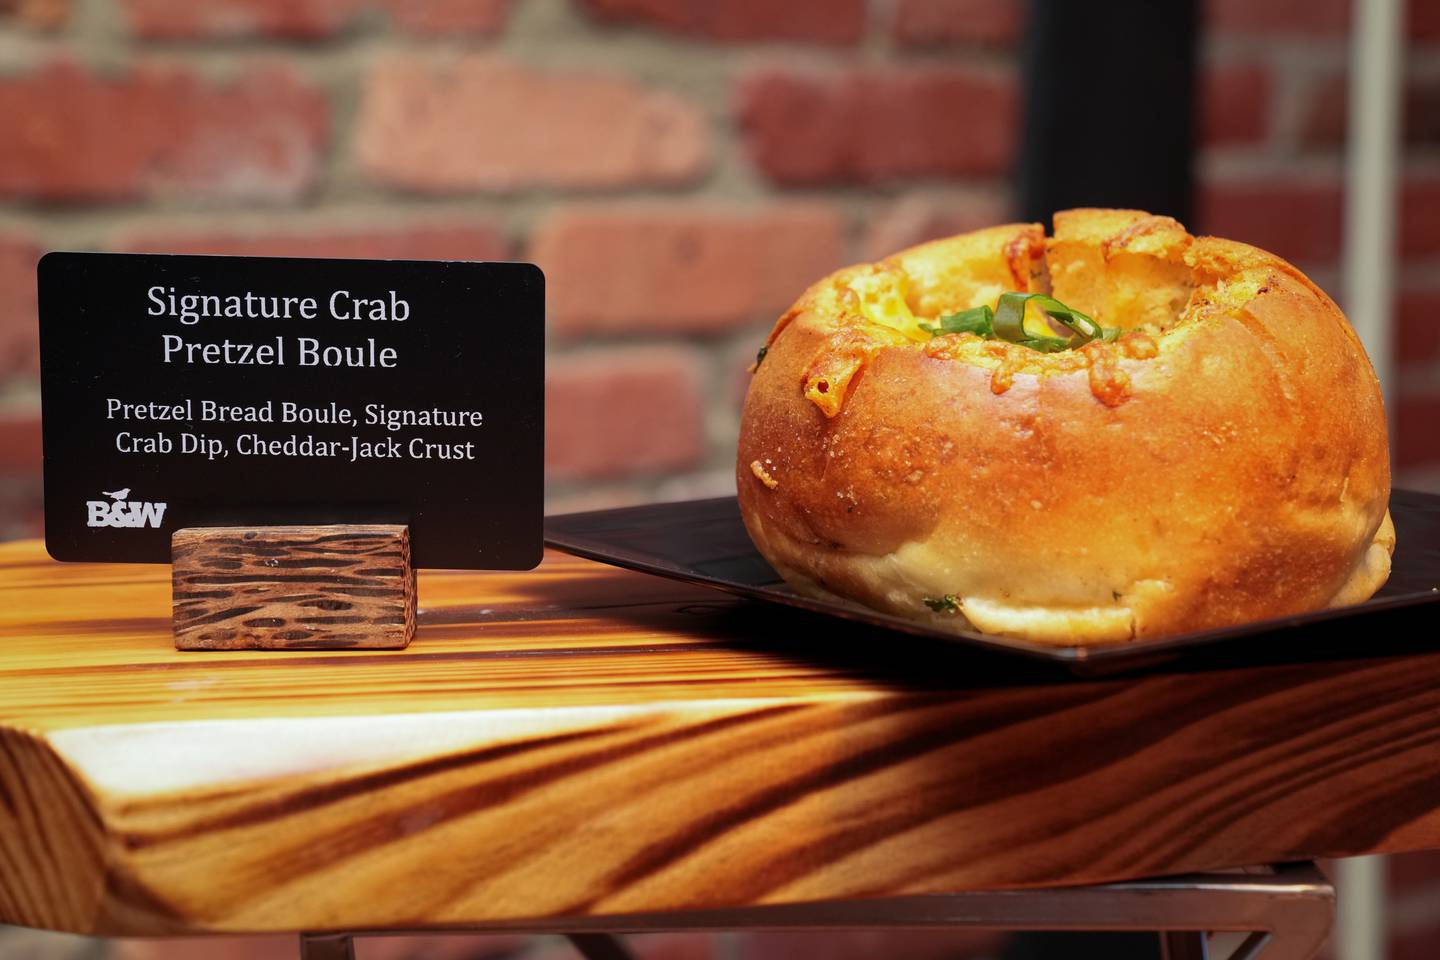 The Signature Crab Pretzel Boule is on display during a media preview in Oriole Park at Camden Yards on Wednesday, March 29.